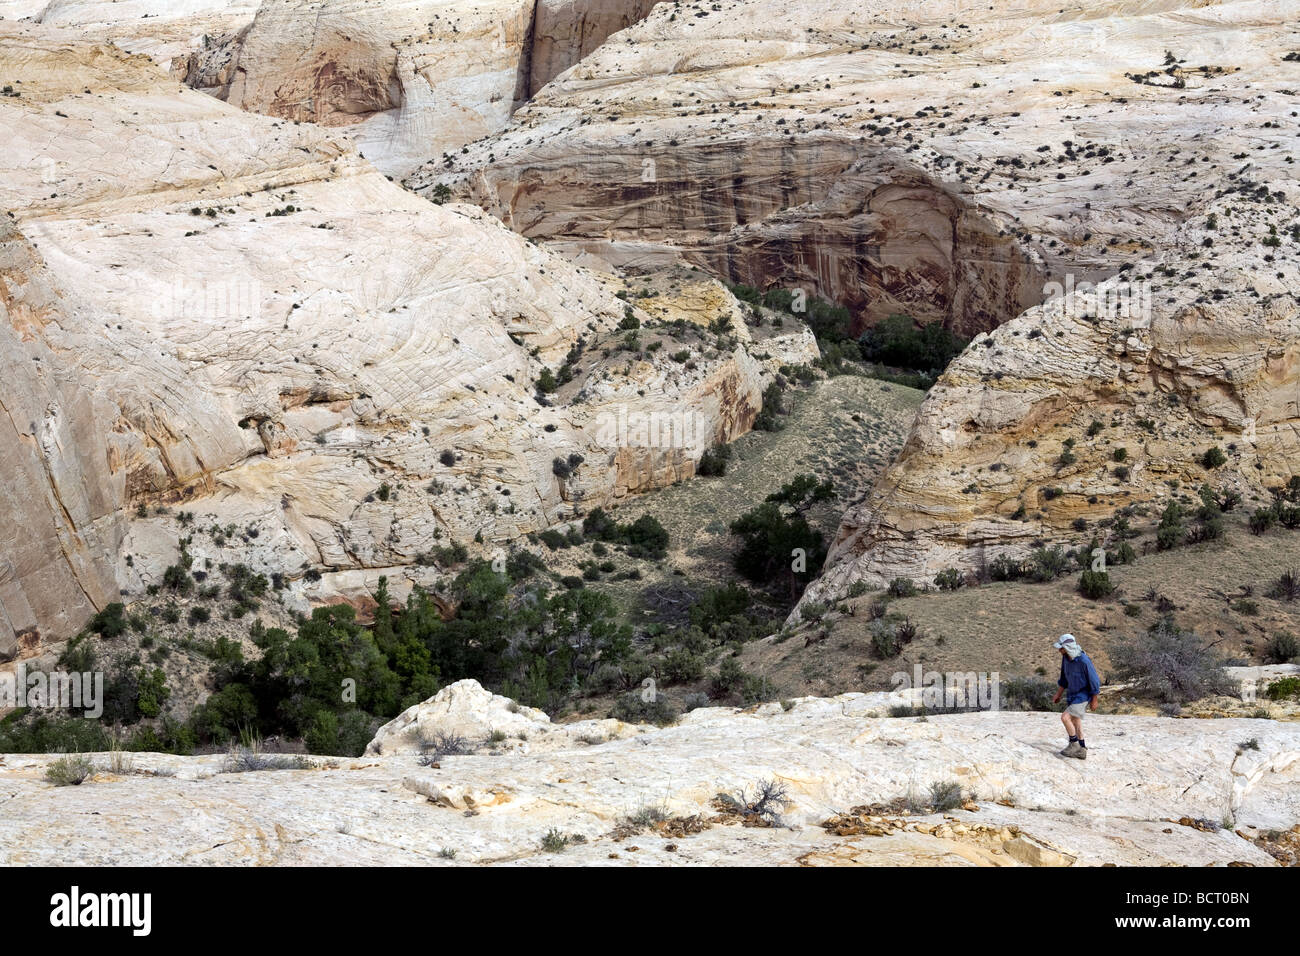 Hiker in the Grand Staircase Escalante National Monument Utah with the Escalante River Canyon in the background Stock Photo